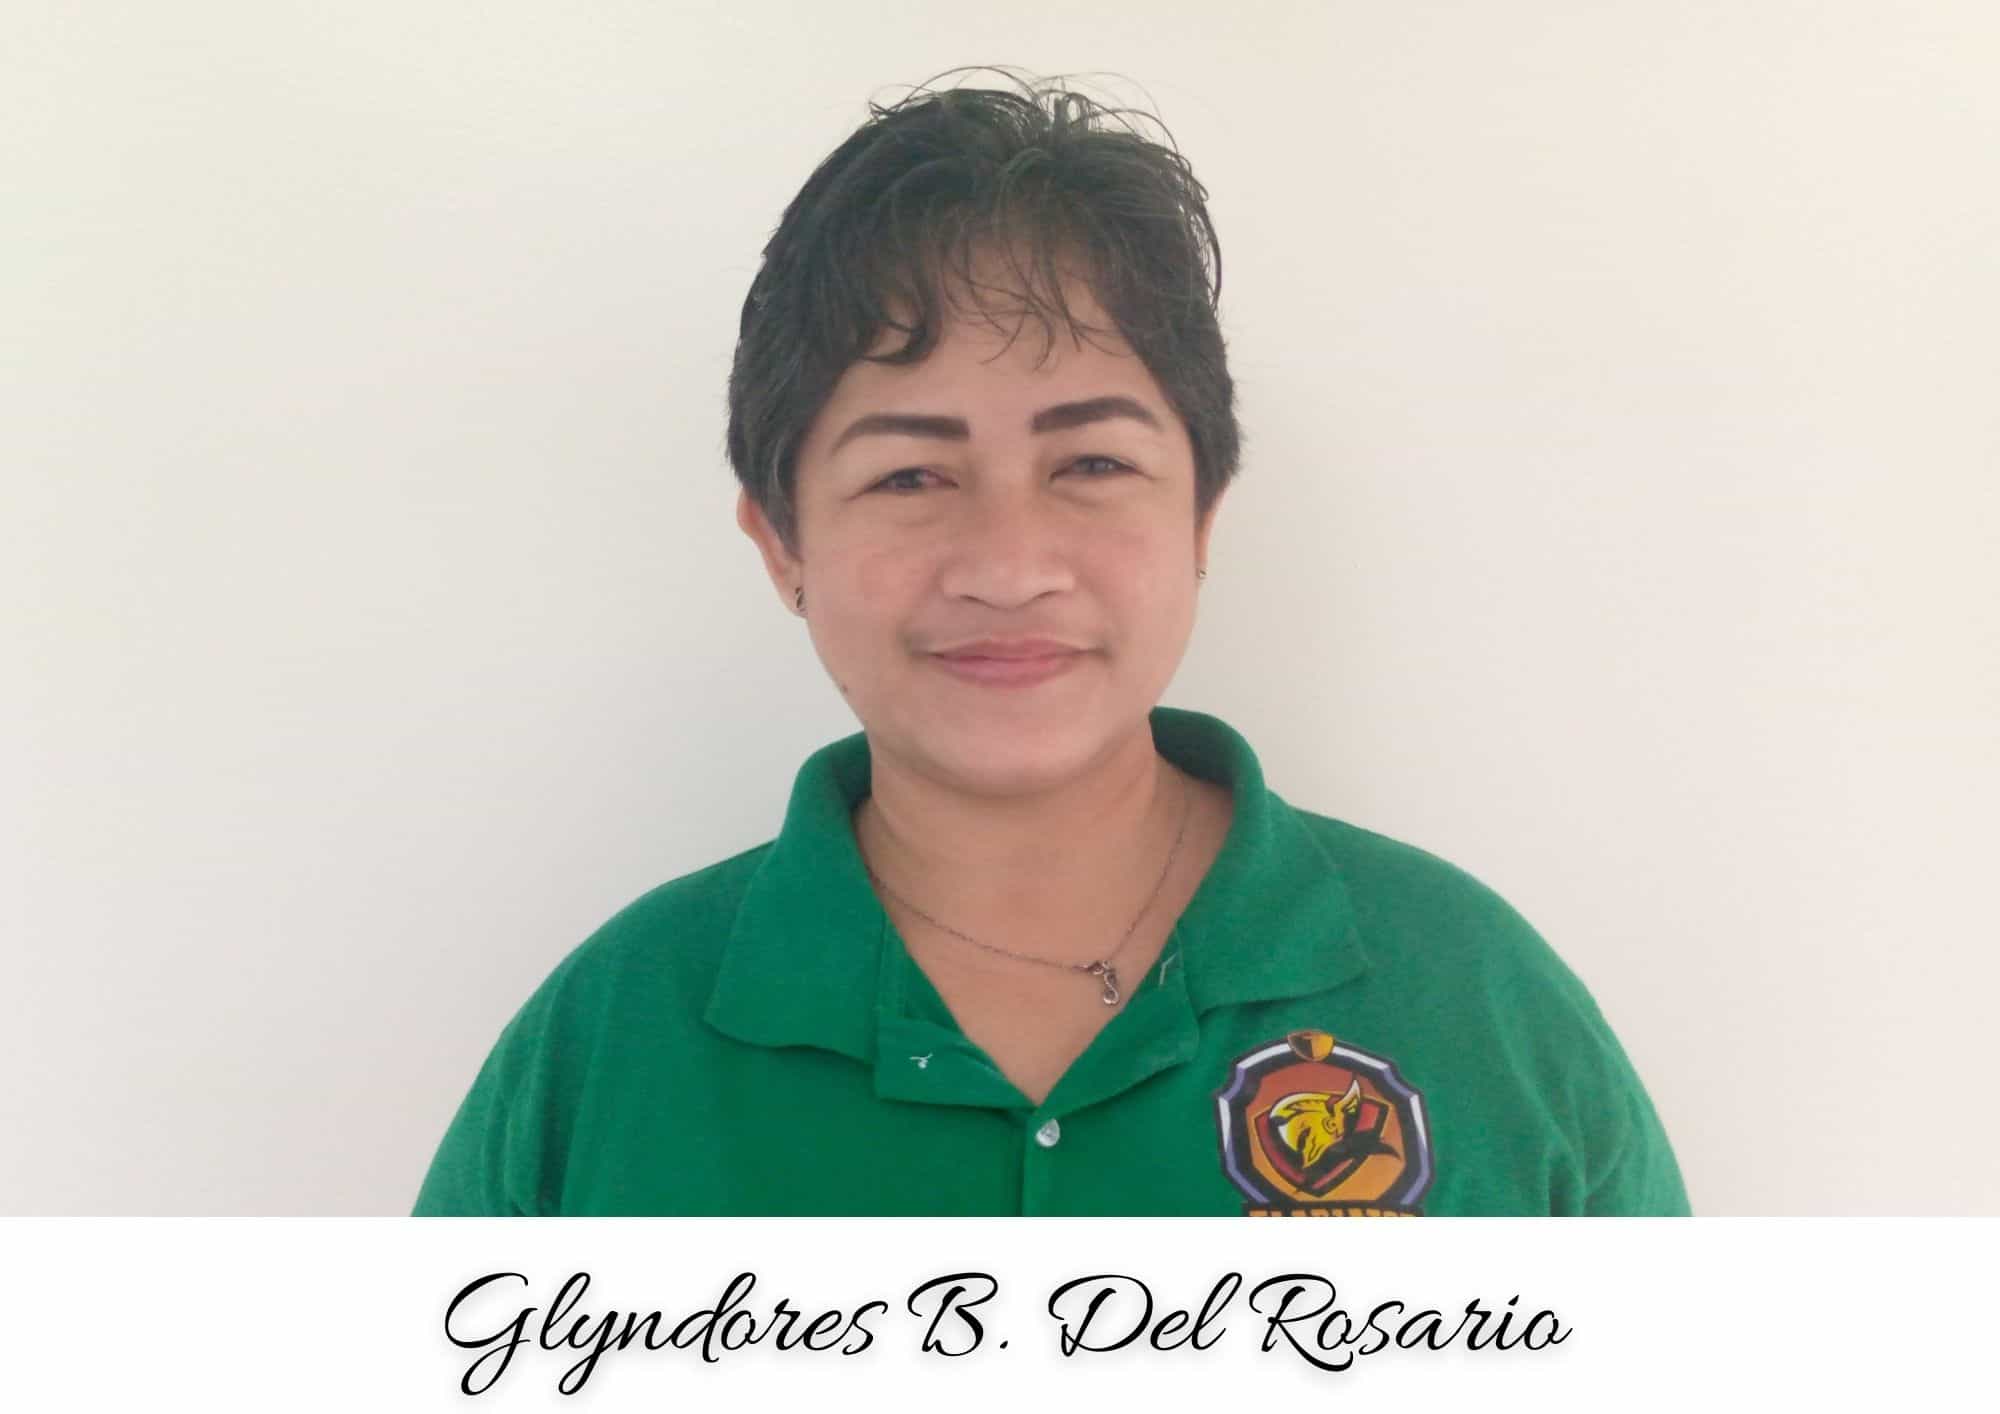 Certified PainFree Provider LEVEL 1 - glyndores b. del rosario